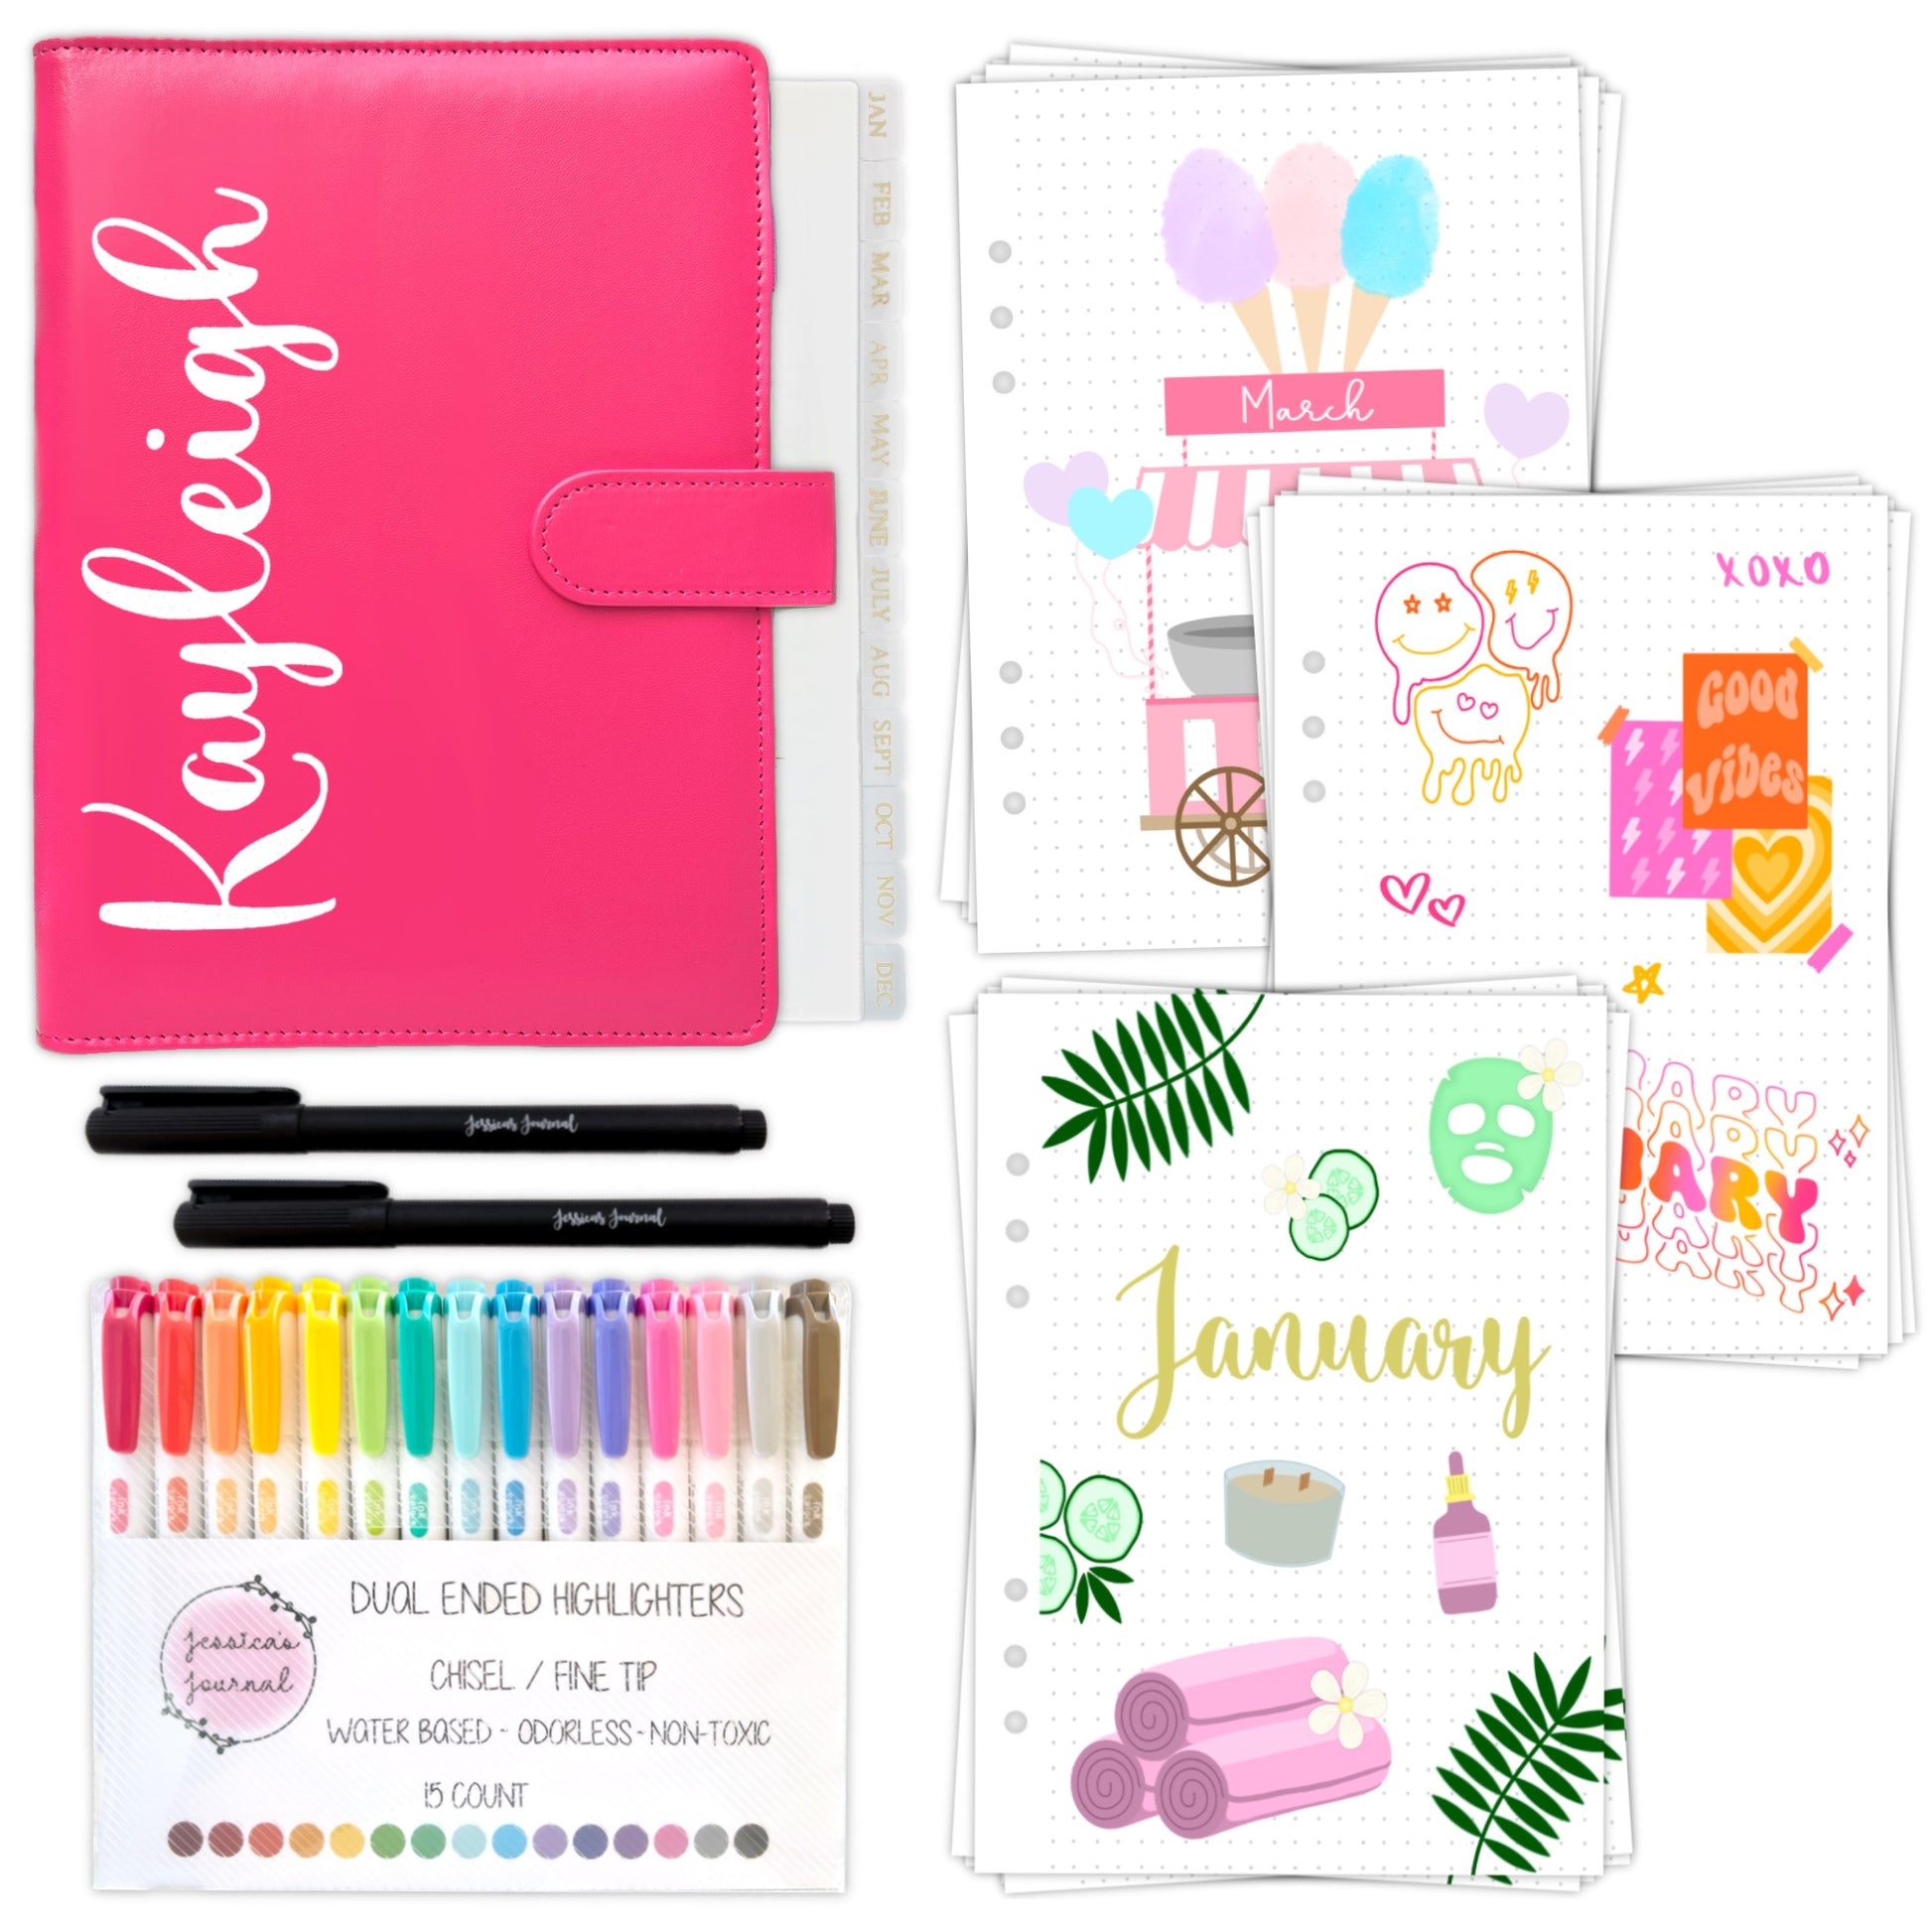 The Full Year Journal Stationery Kit Personalized Spreads jan-dec 2024  Highlighters Brush Pens Marker Pens Jessicas Journal 